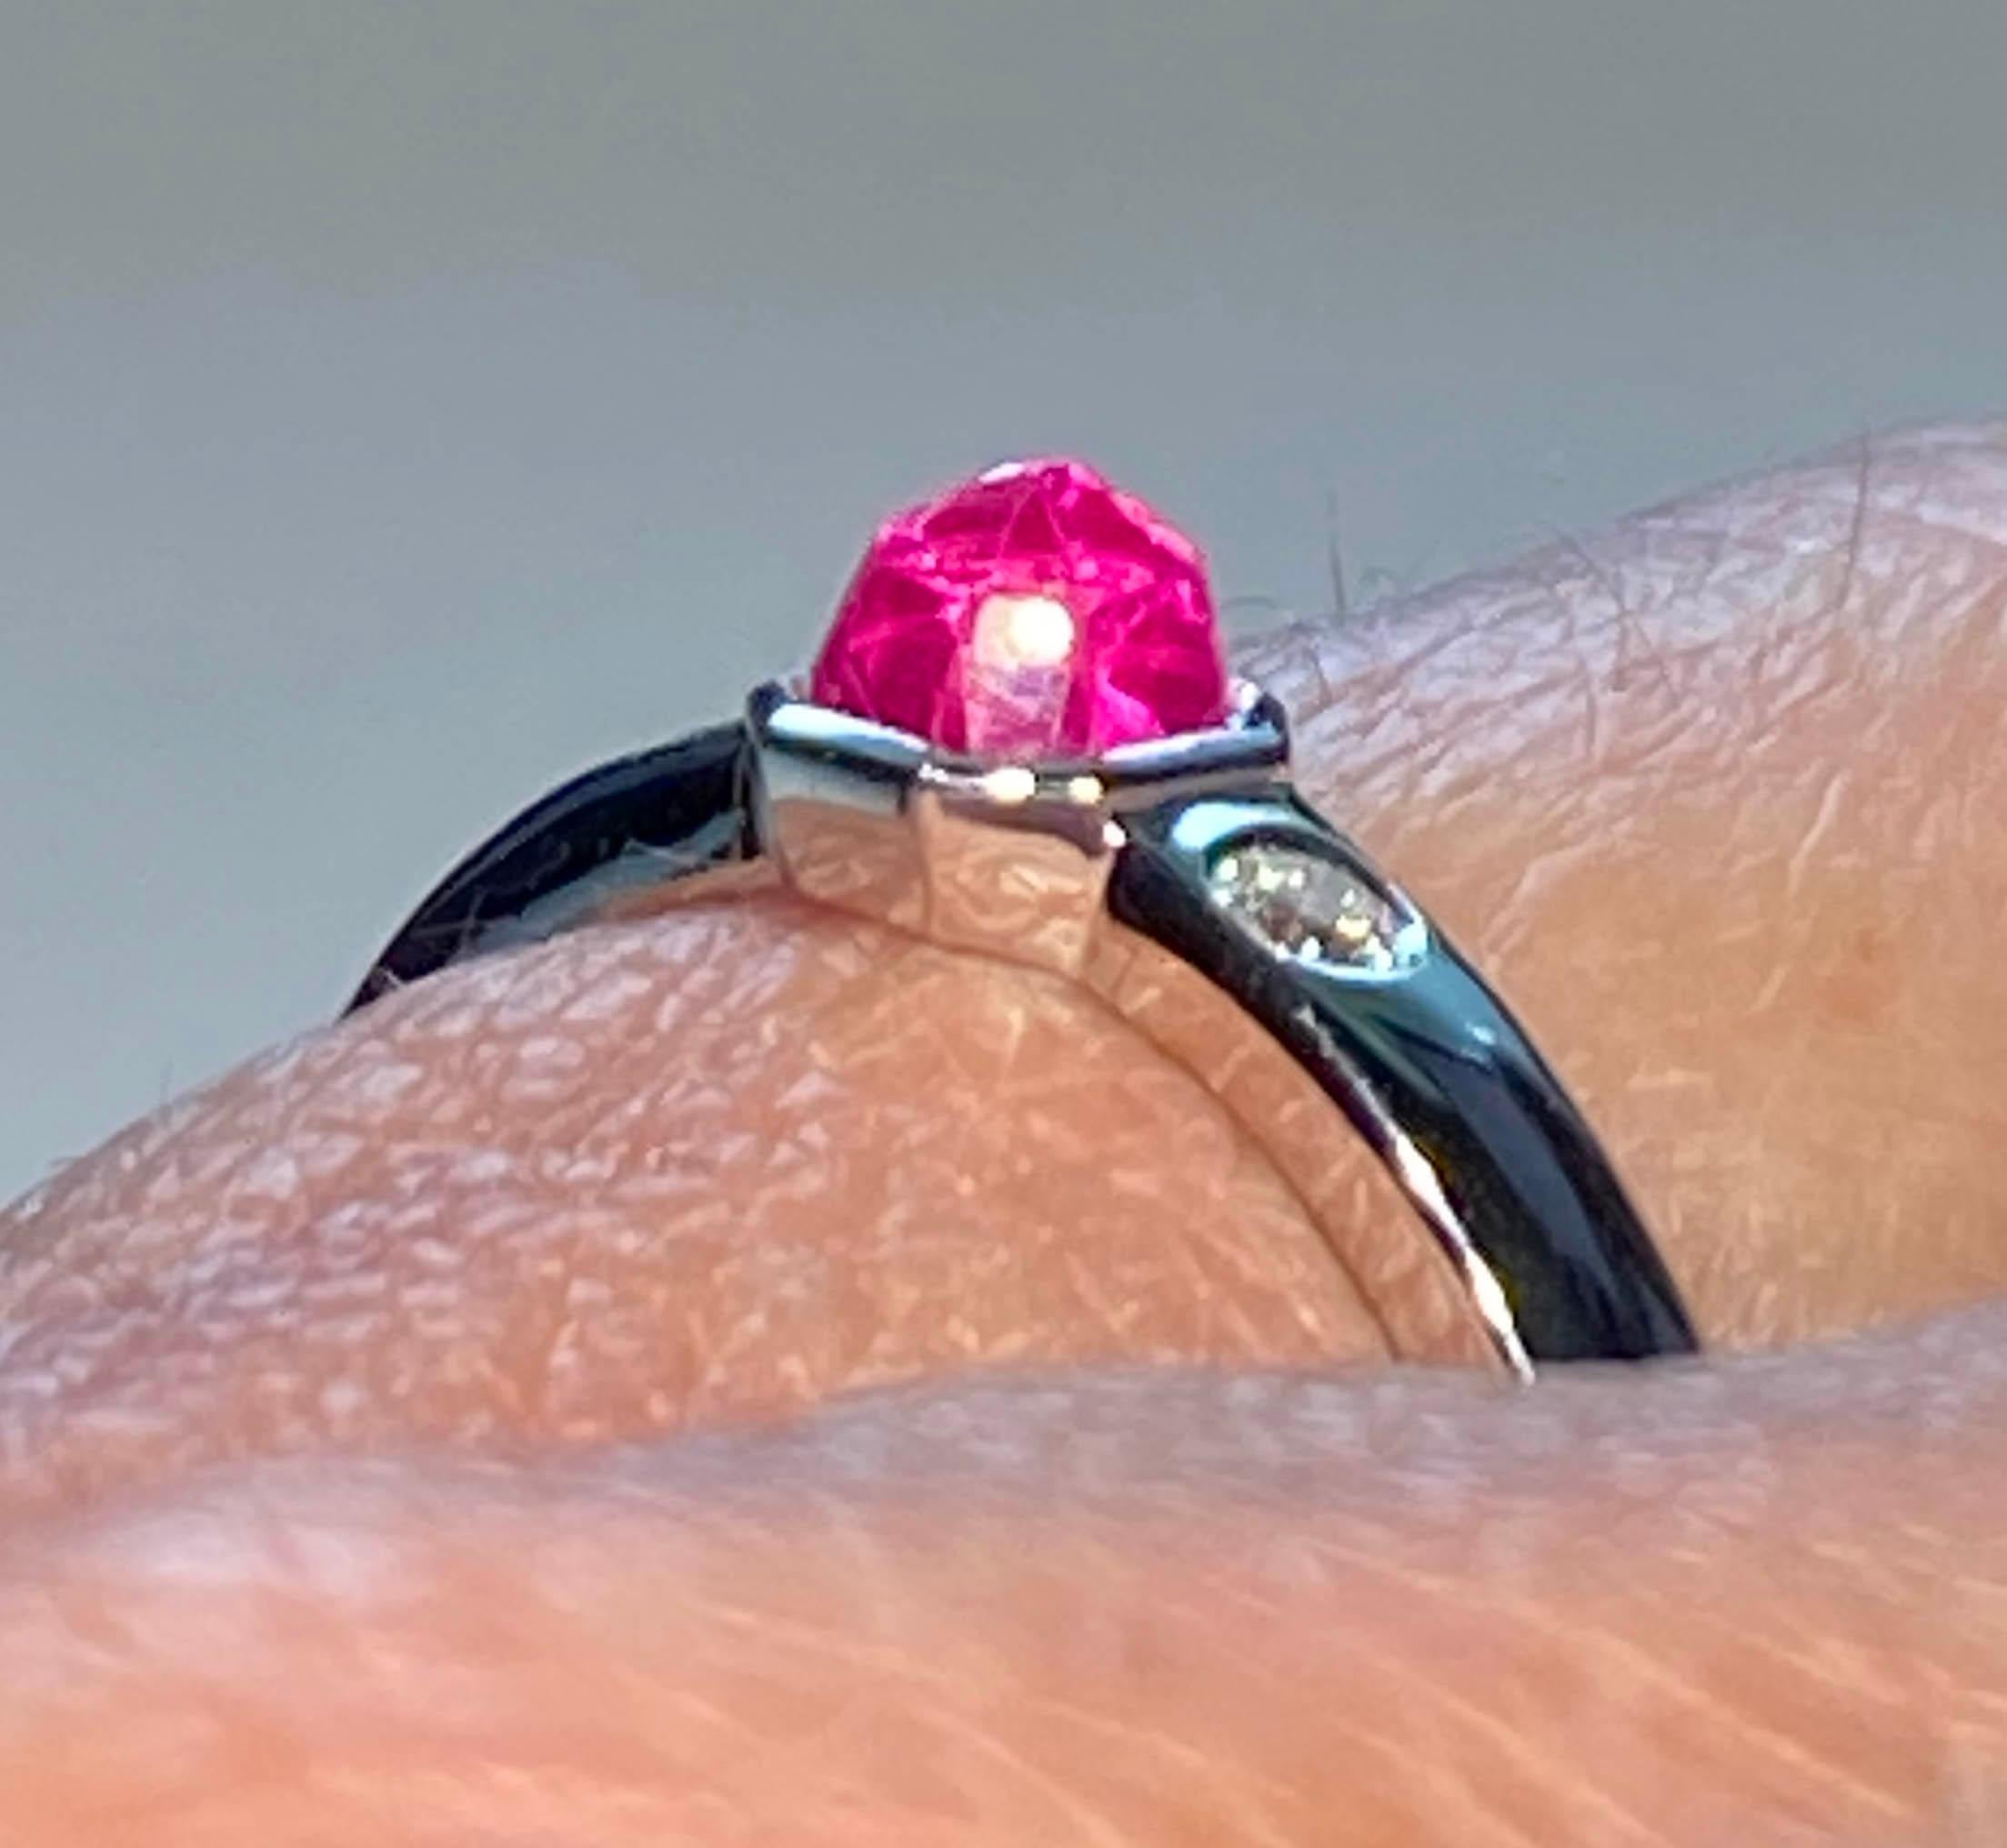 Kary Adam Designed, 18kt White Gold Ring, set with a Pavillion Up, Pink Sapphire and two accent Diamonds. Sapphire Weight is 0.74 Carats, Diamond Weight is 0.07 Carats. Gold Weight 3.39 Grams. Ring Size 7 USA

Originally from San Diego, California,